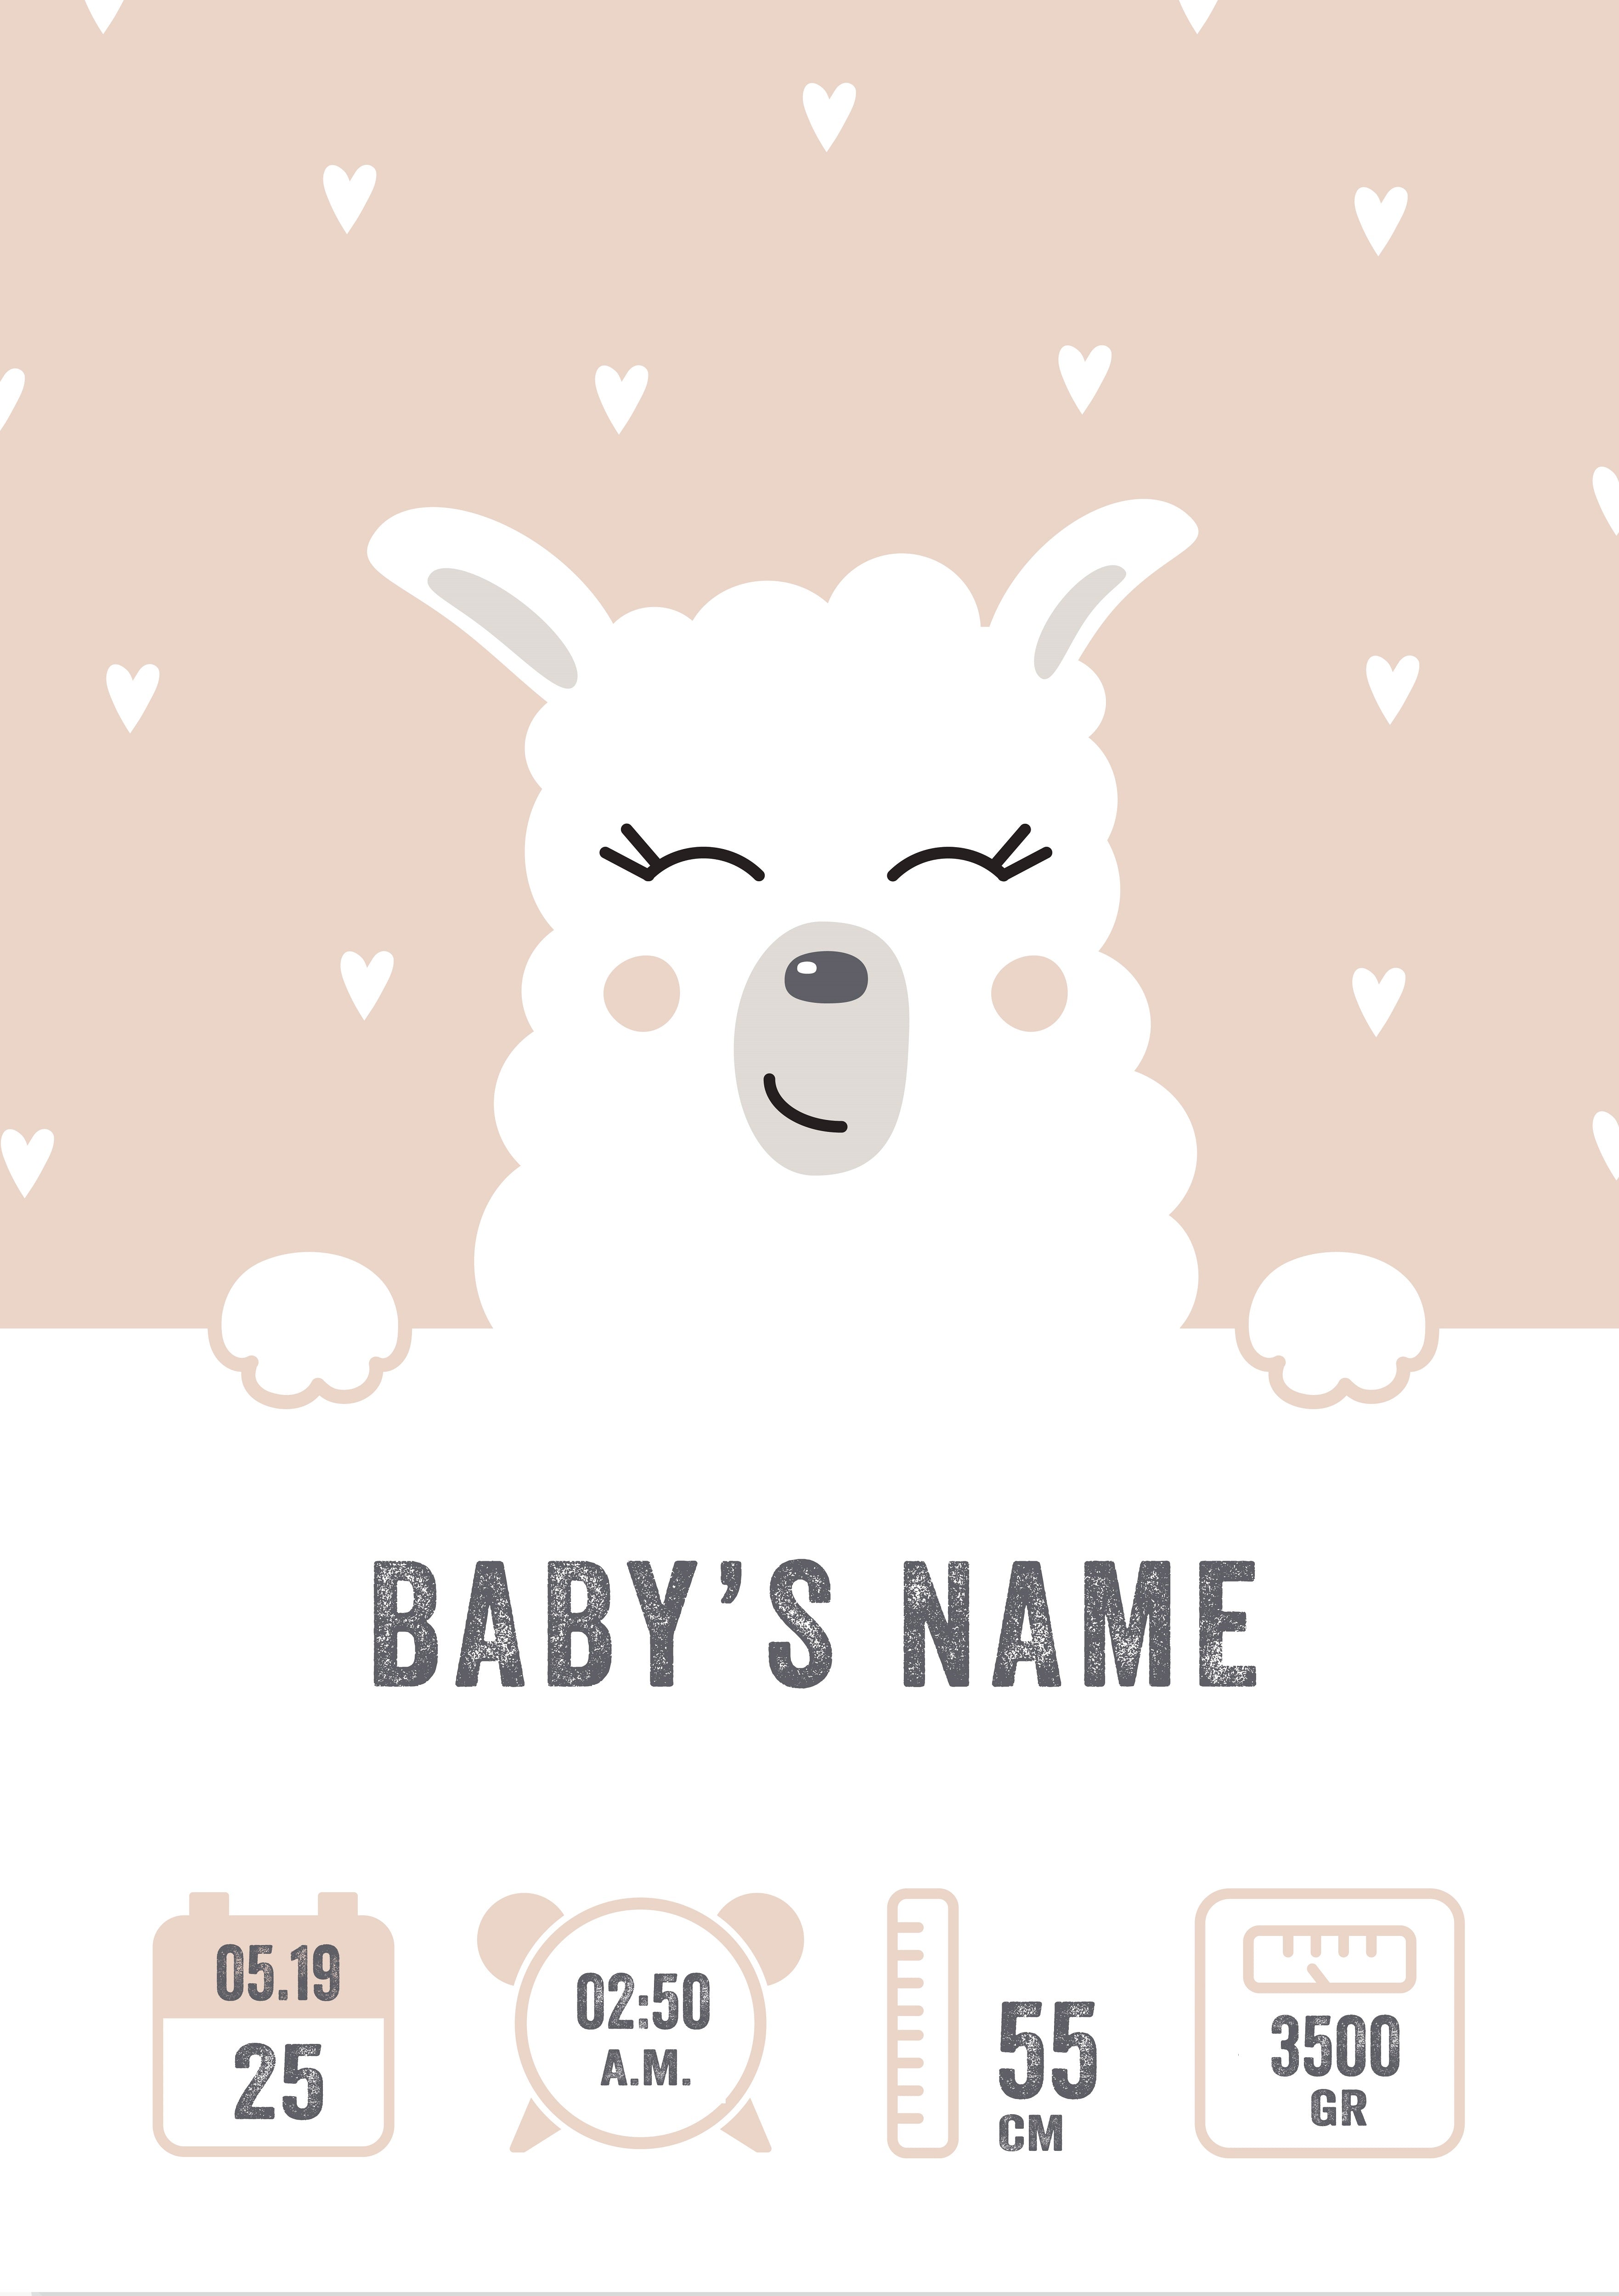 Baby birth poster with name, weight, date, time and length